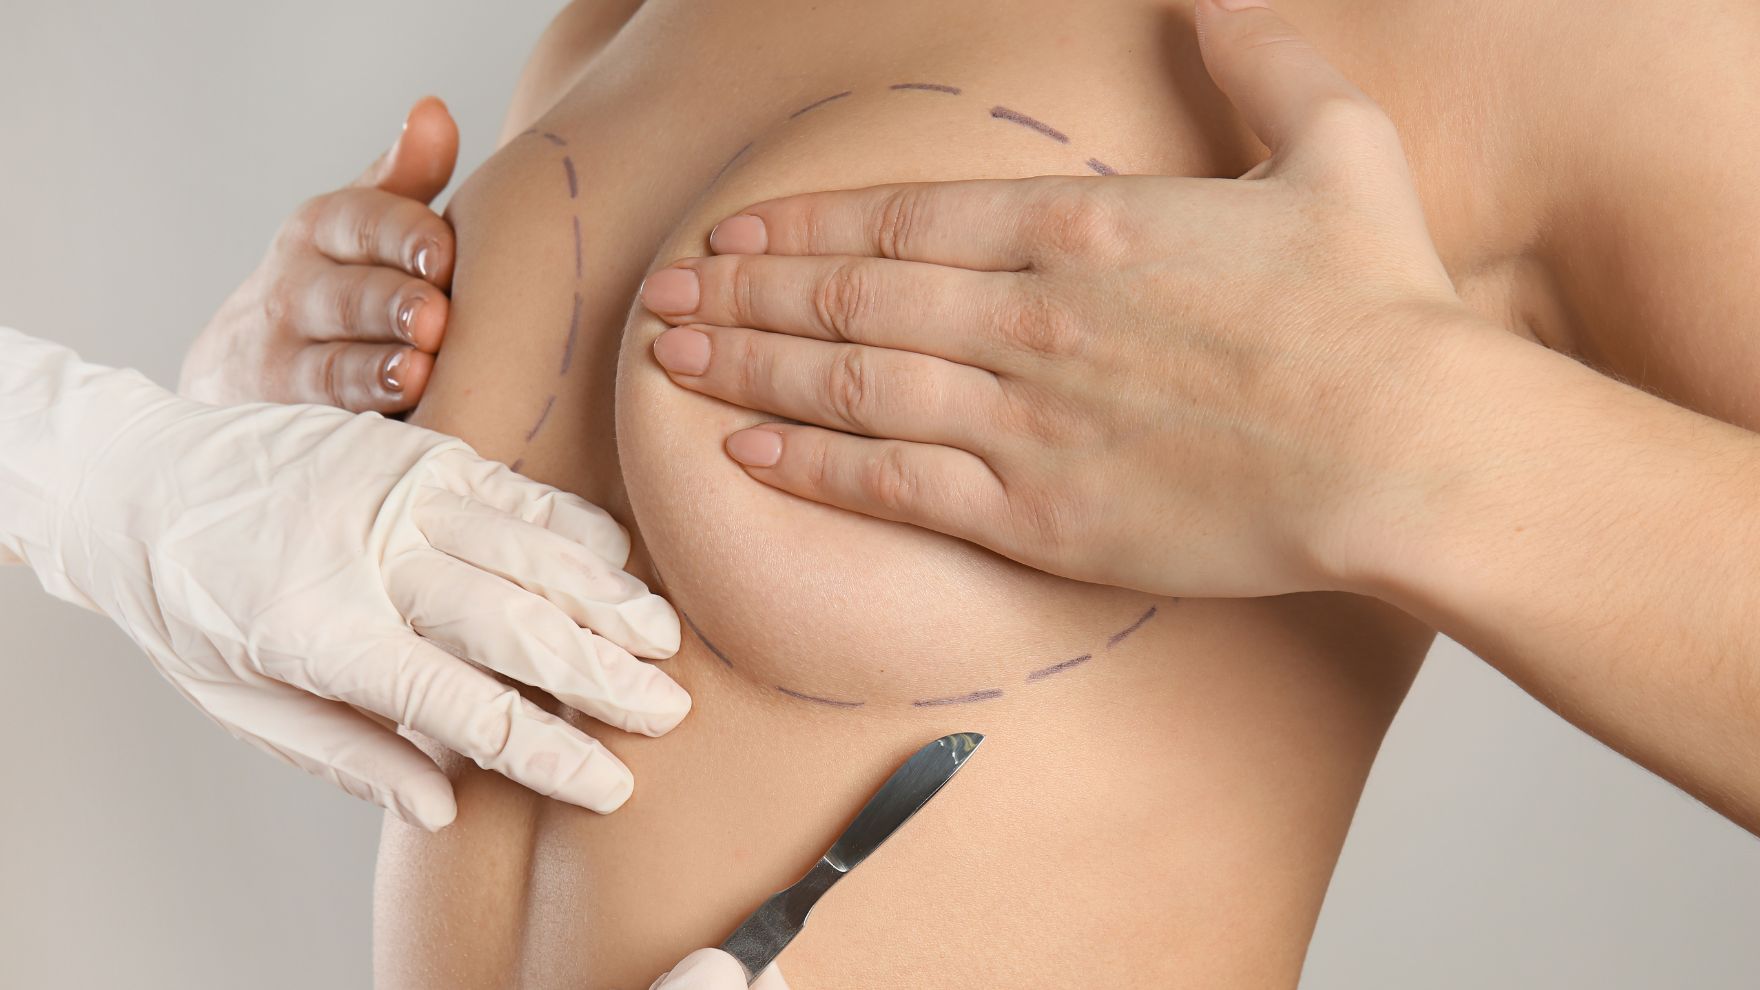 difference between a breast lift and a breast reduction